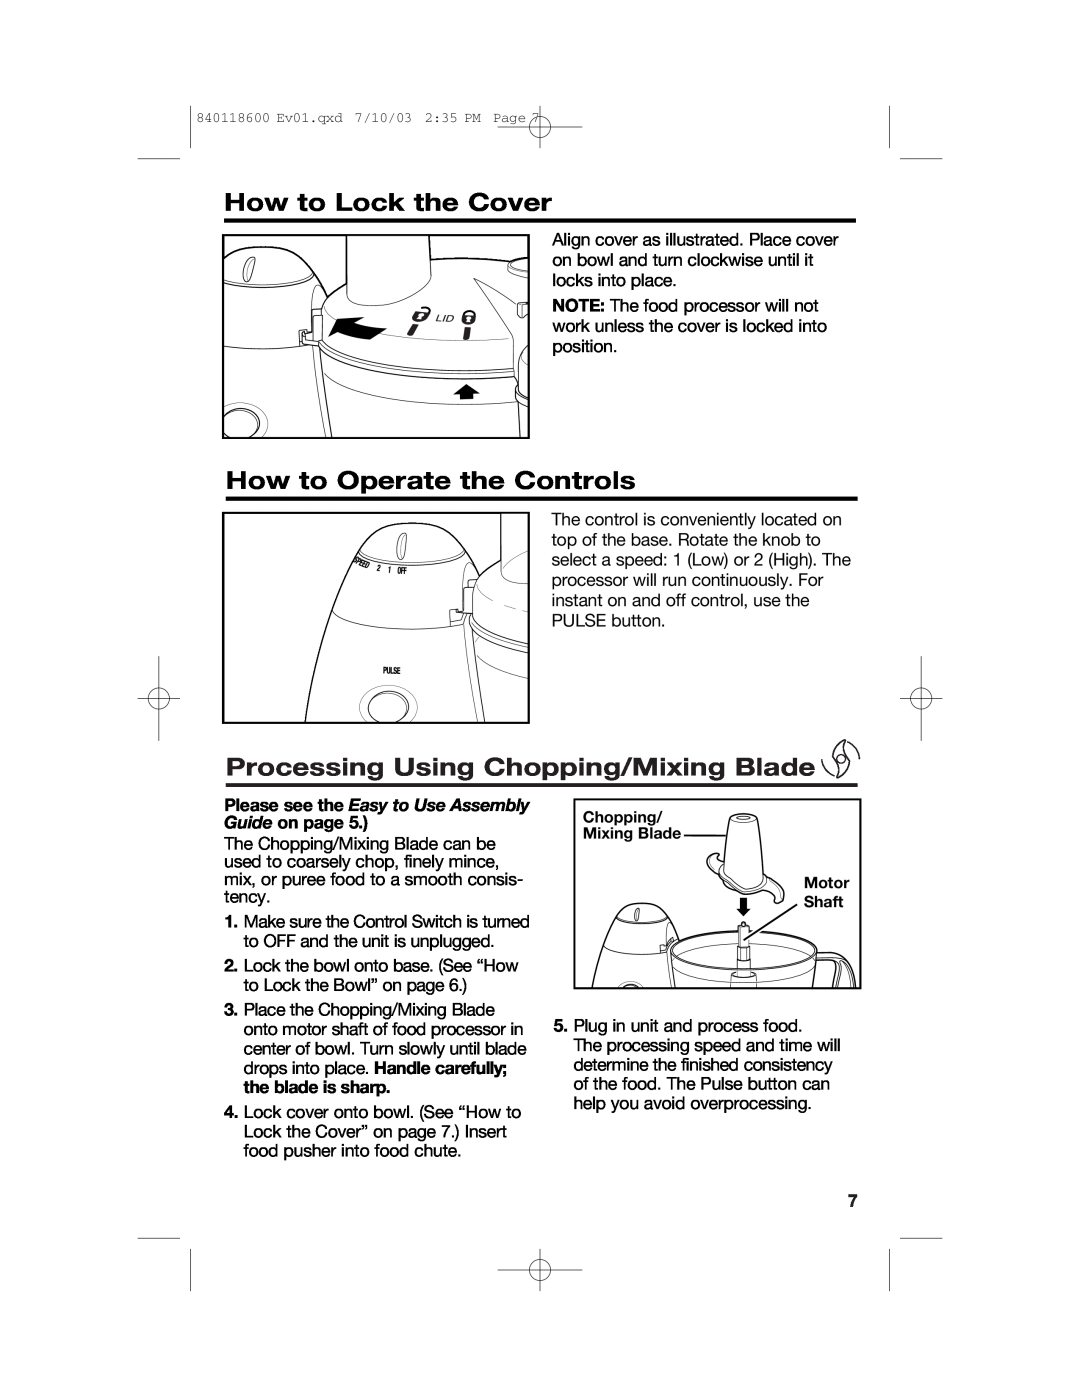 Hamilton Beach 70550RC manual How to Lock the Cover, How to Operate the Controls, Processing Using Chopping/Mixing Blade 